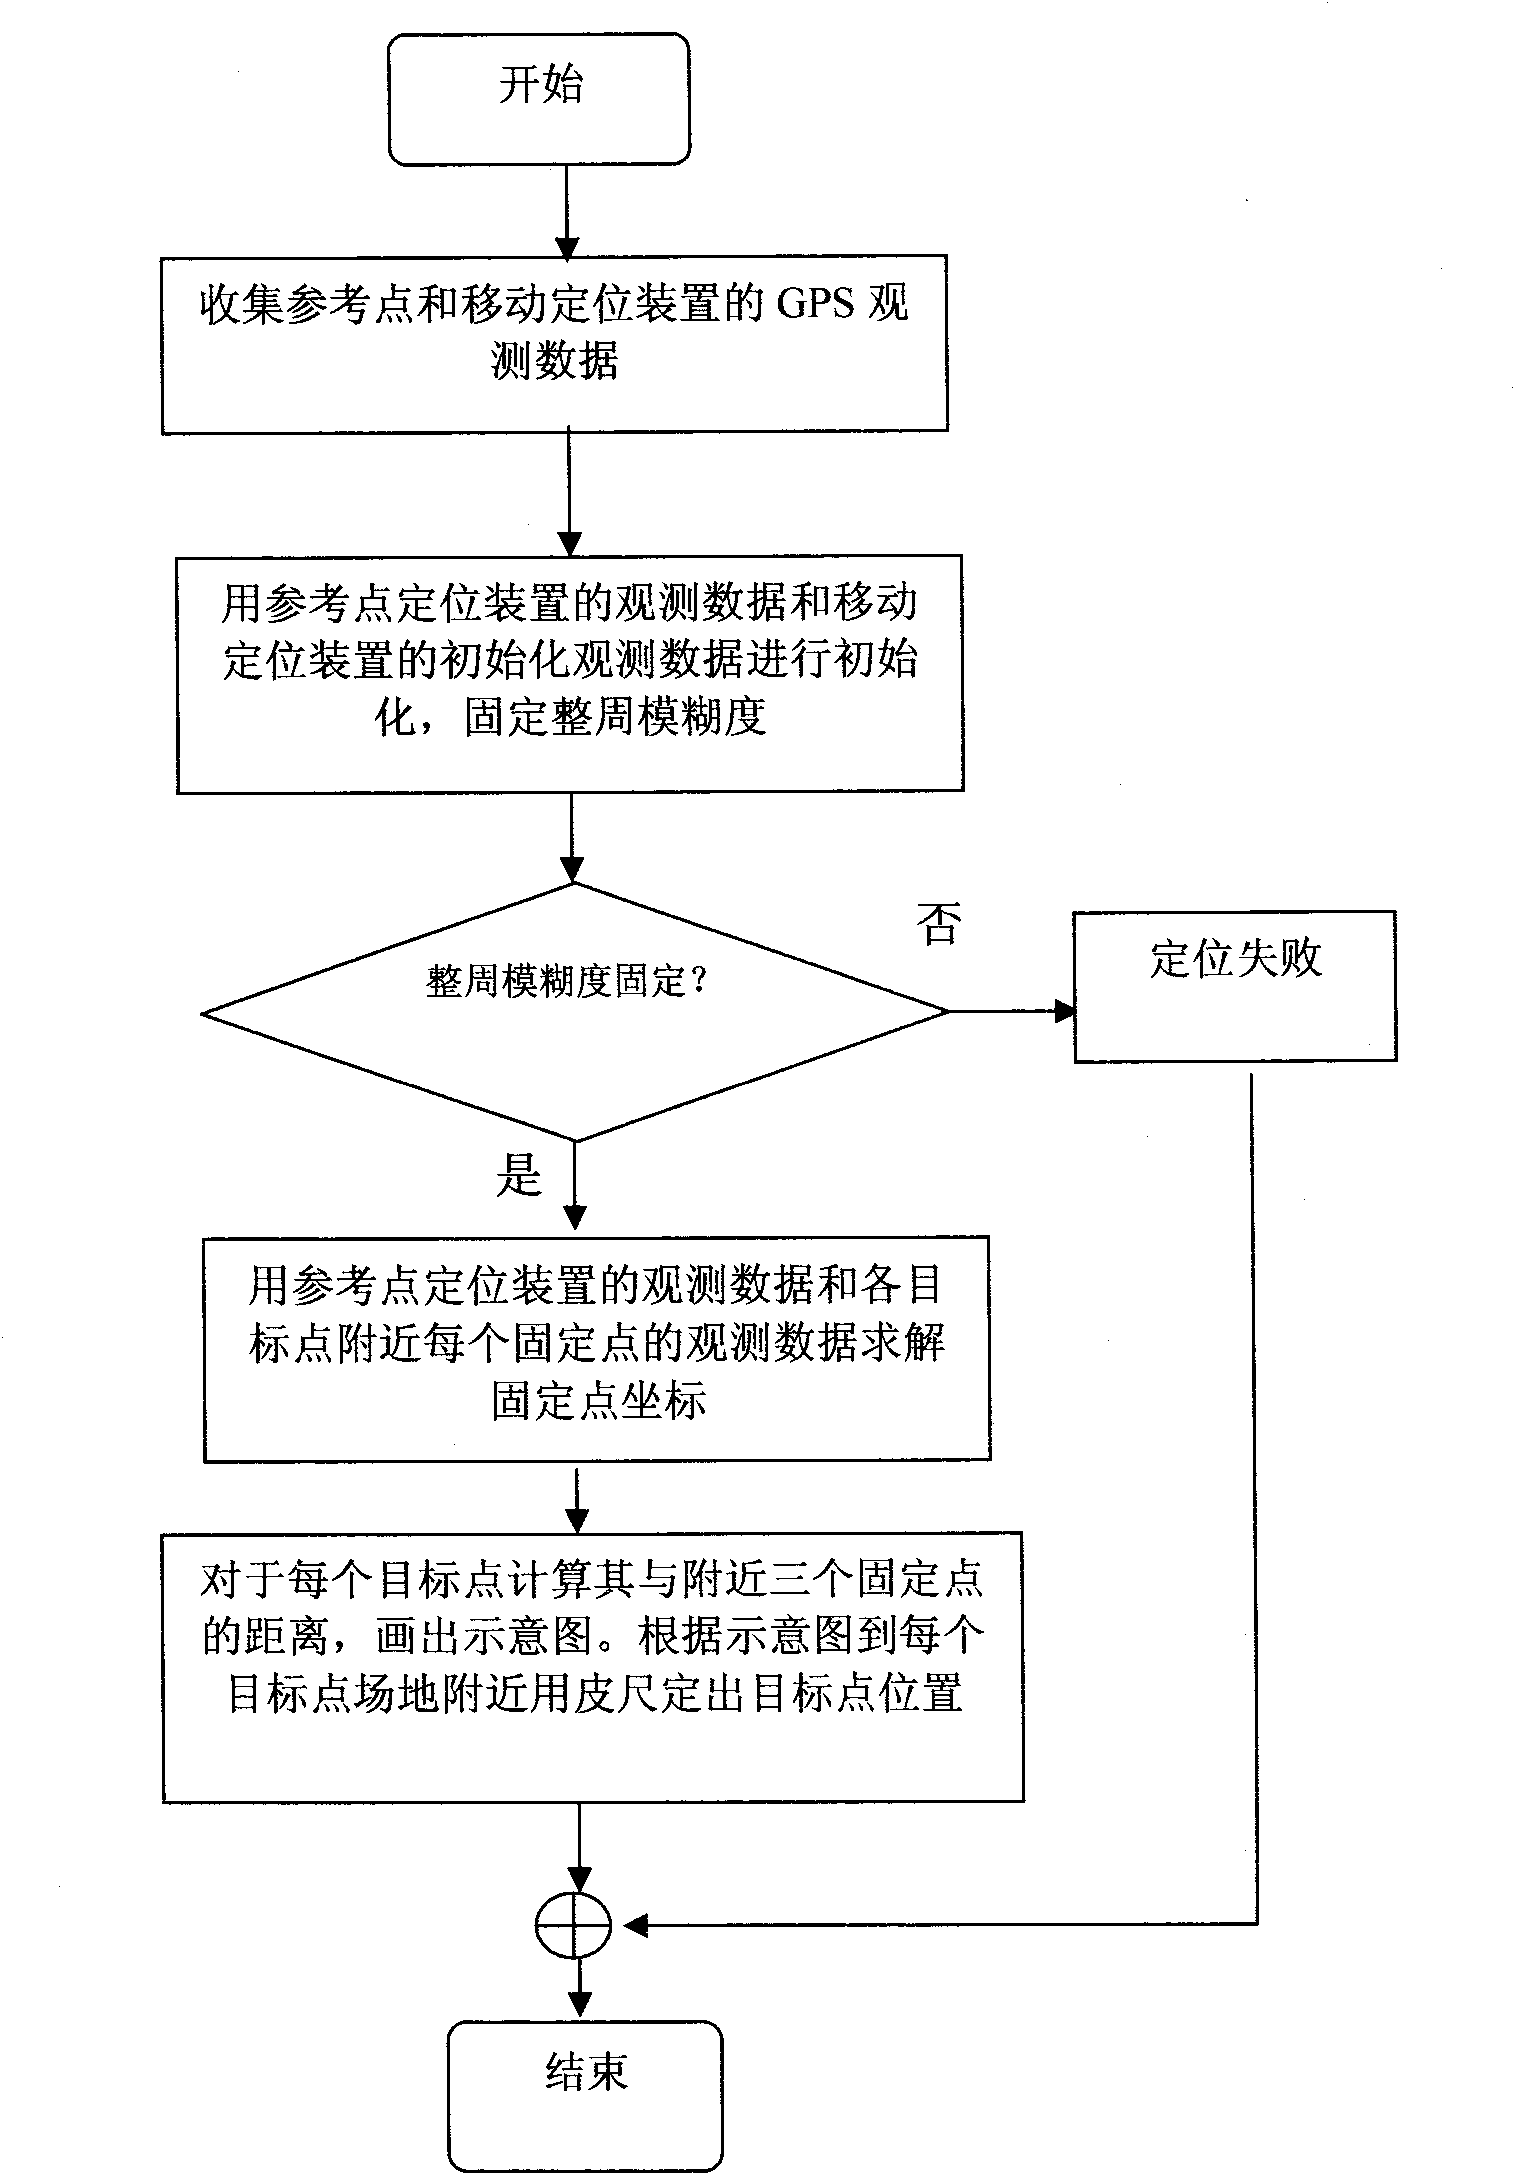 Precise positioning method and device of array layout